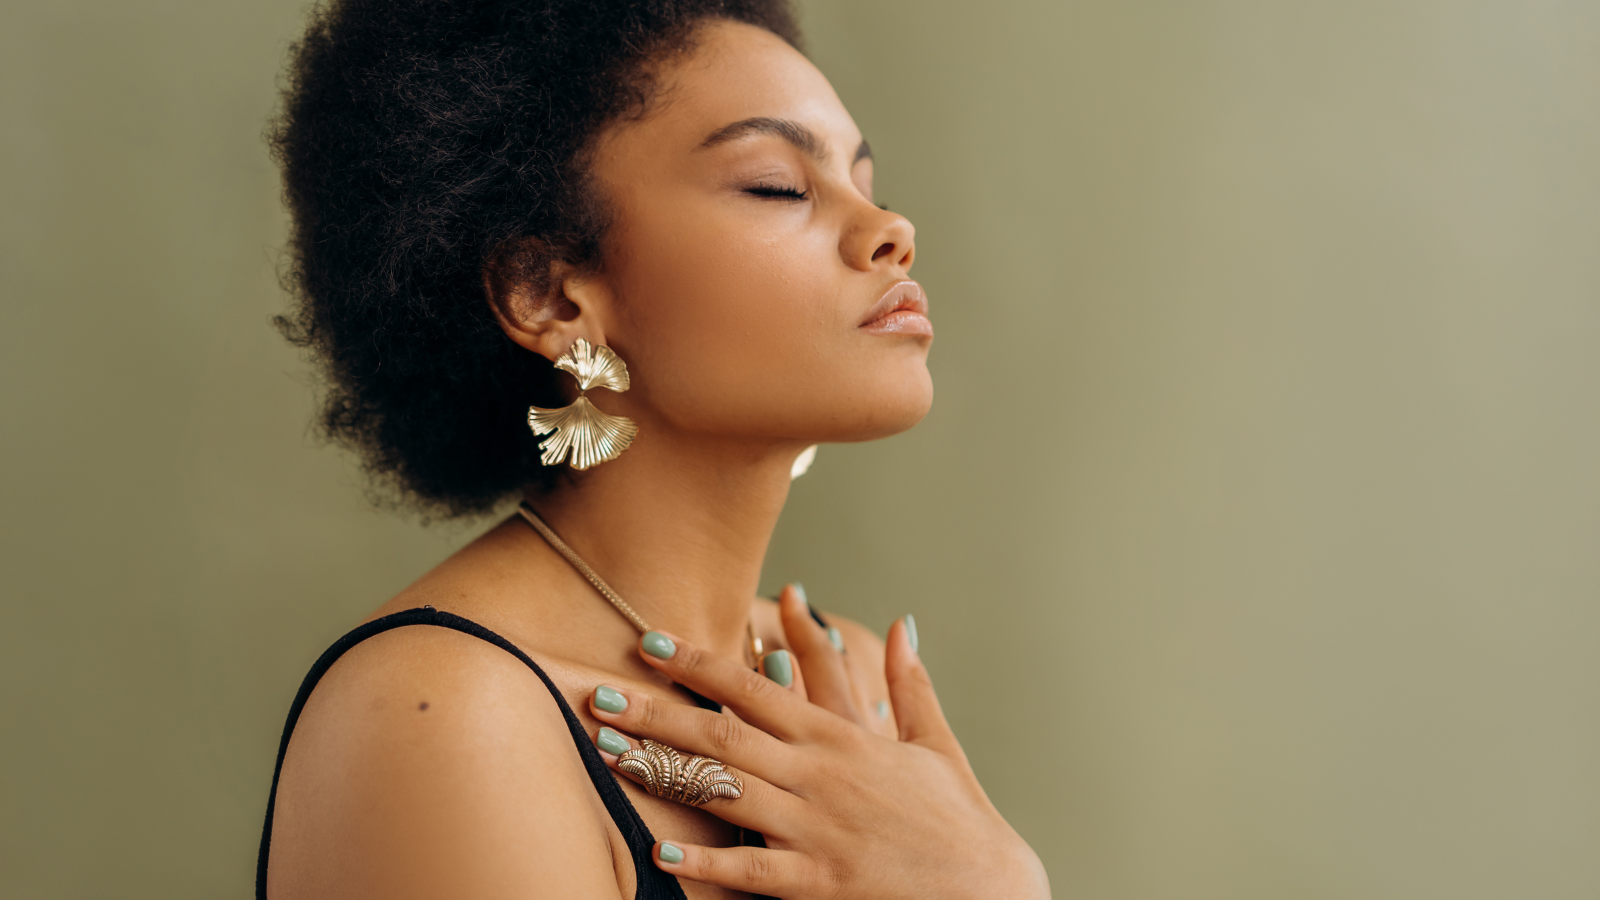 The Spiritual Connections of Jewelry